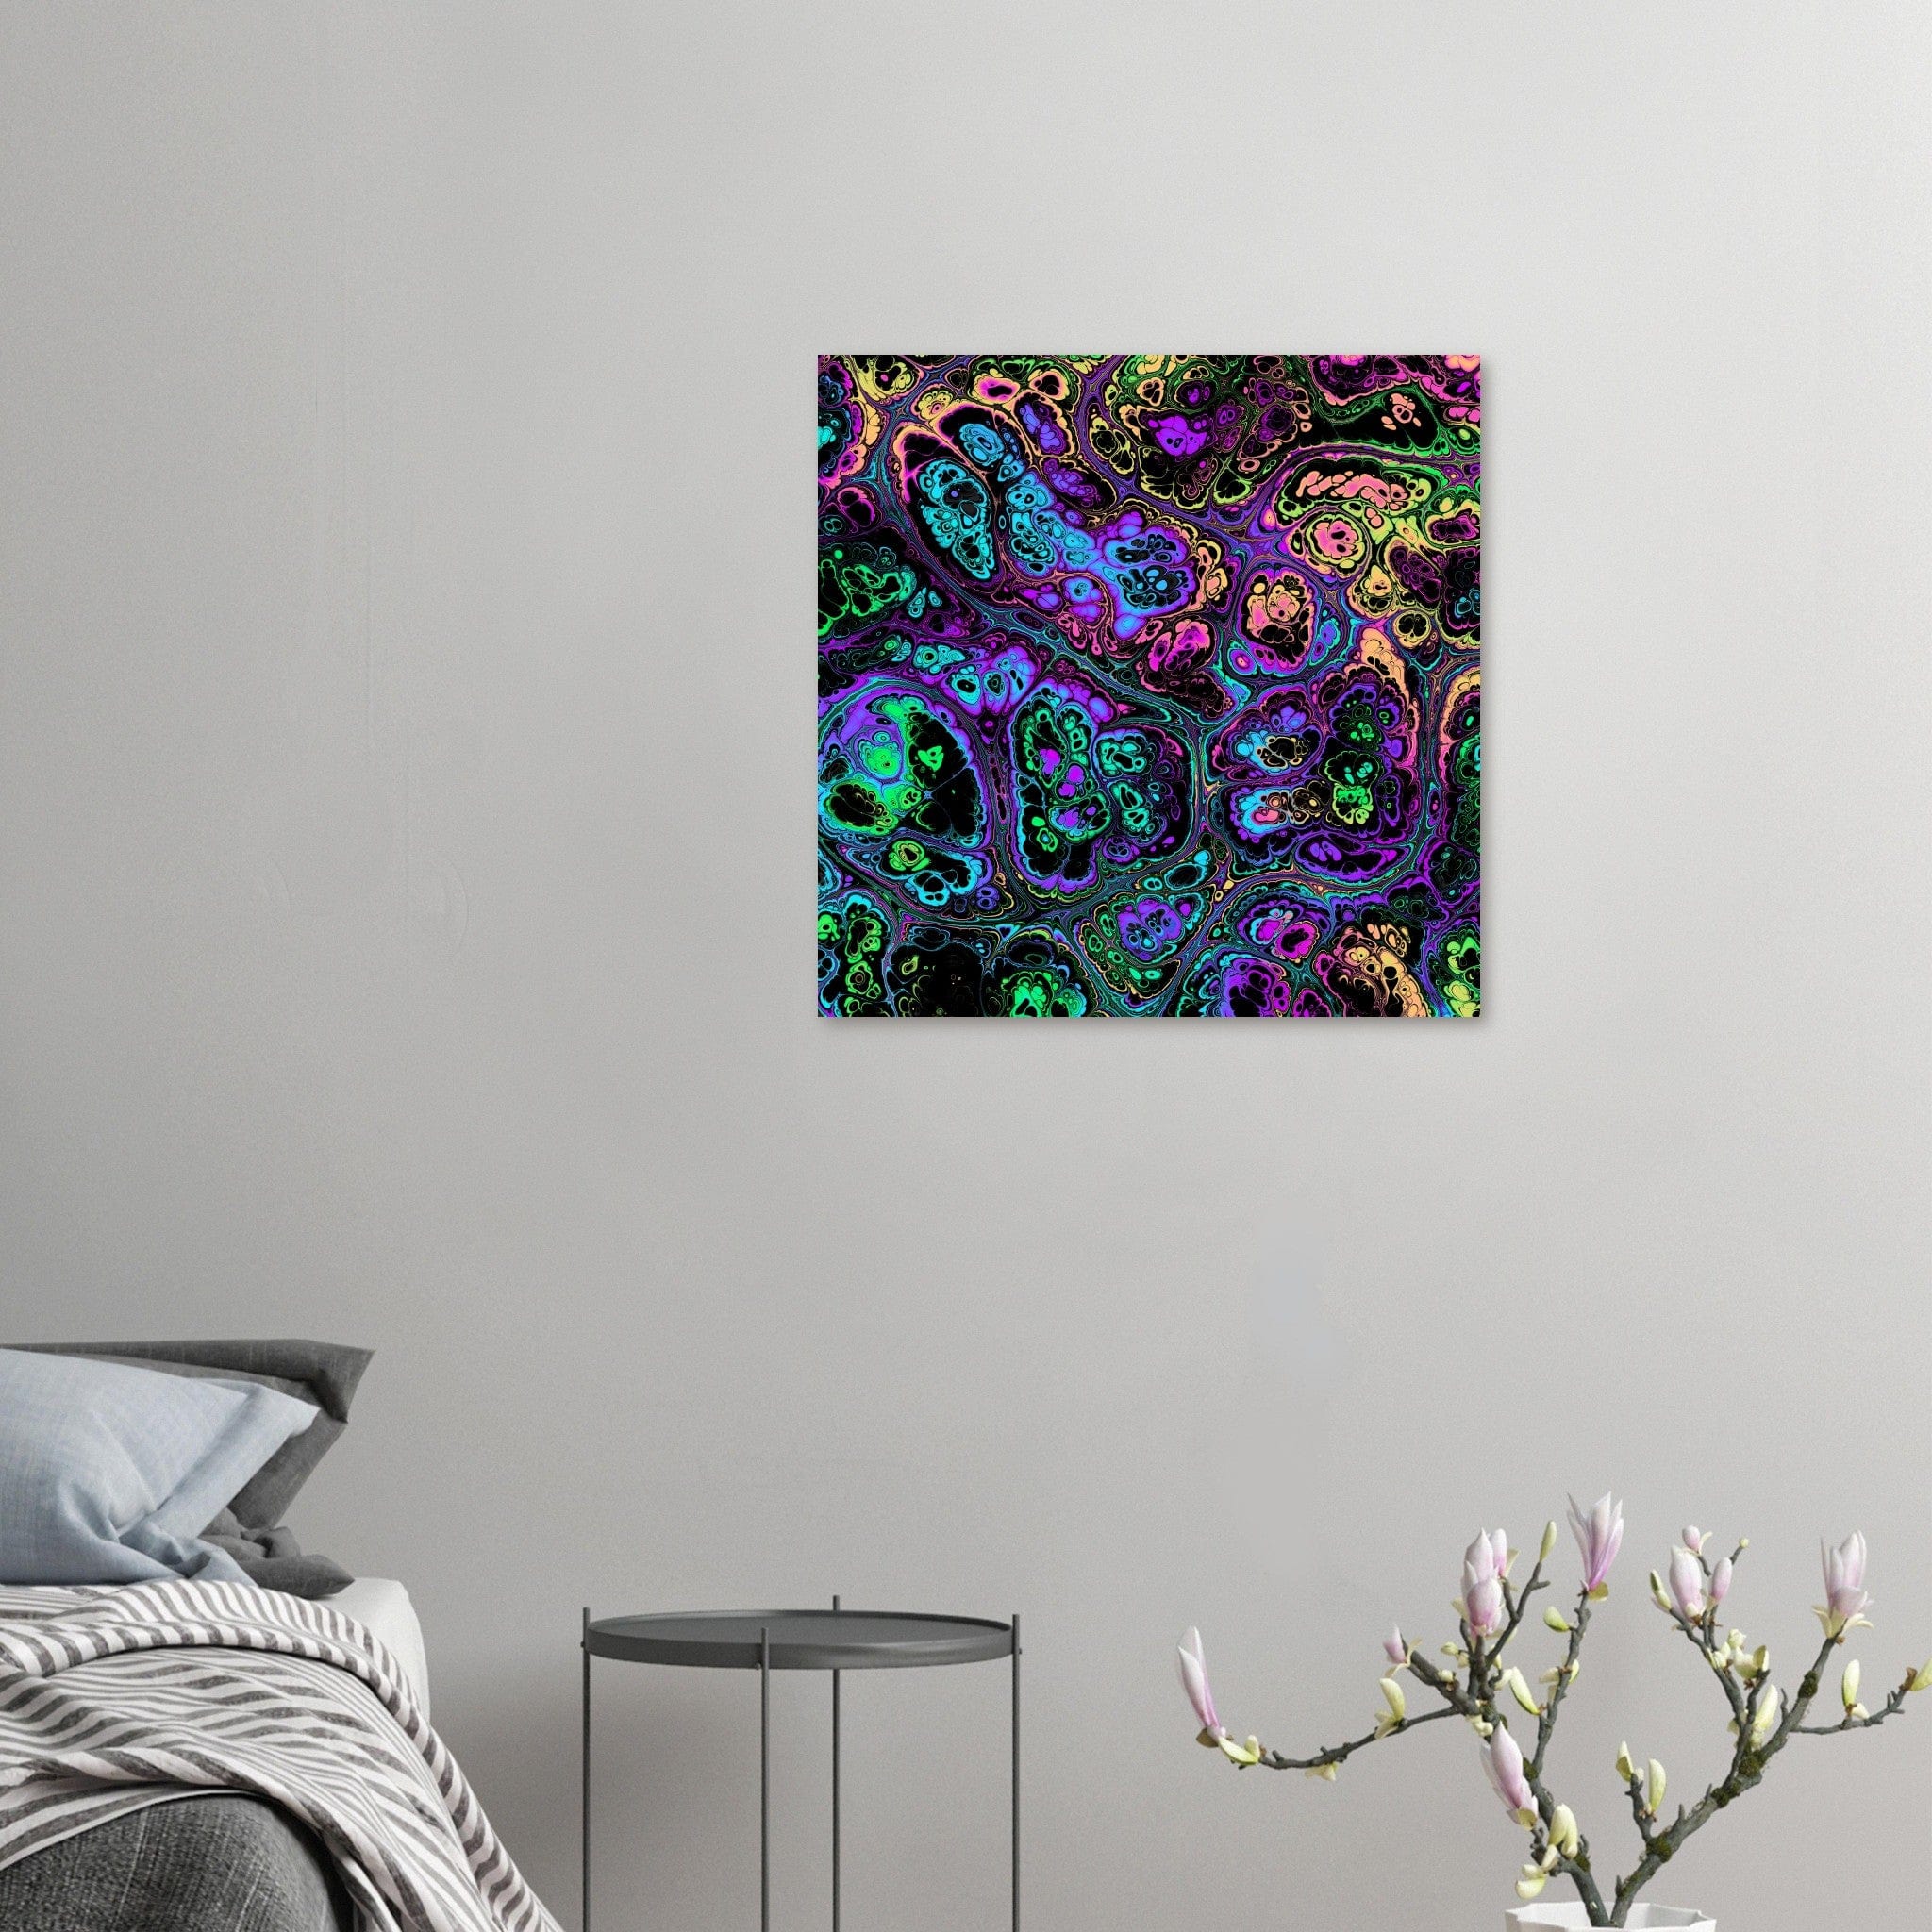 Little Squiffy Print Material 60x60 cm / 24x24″ / Vertical Neon Psychedelic Marble Aluminum Print Wall Art